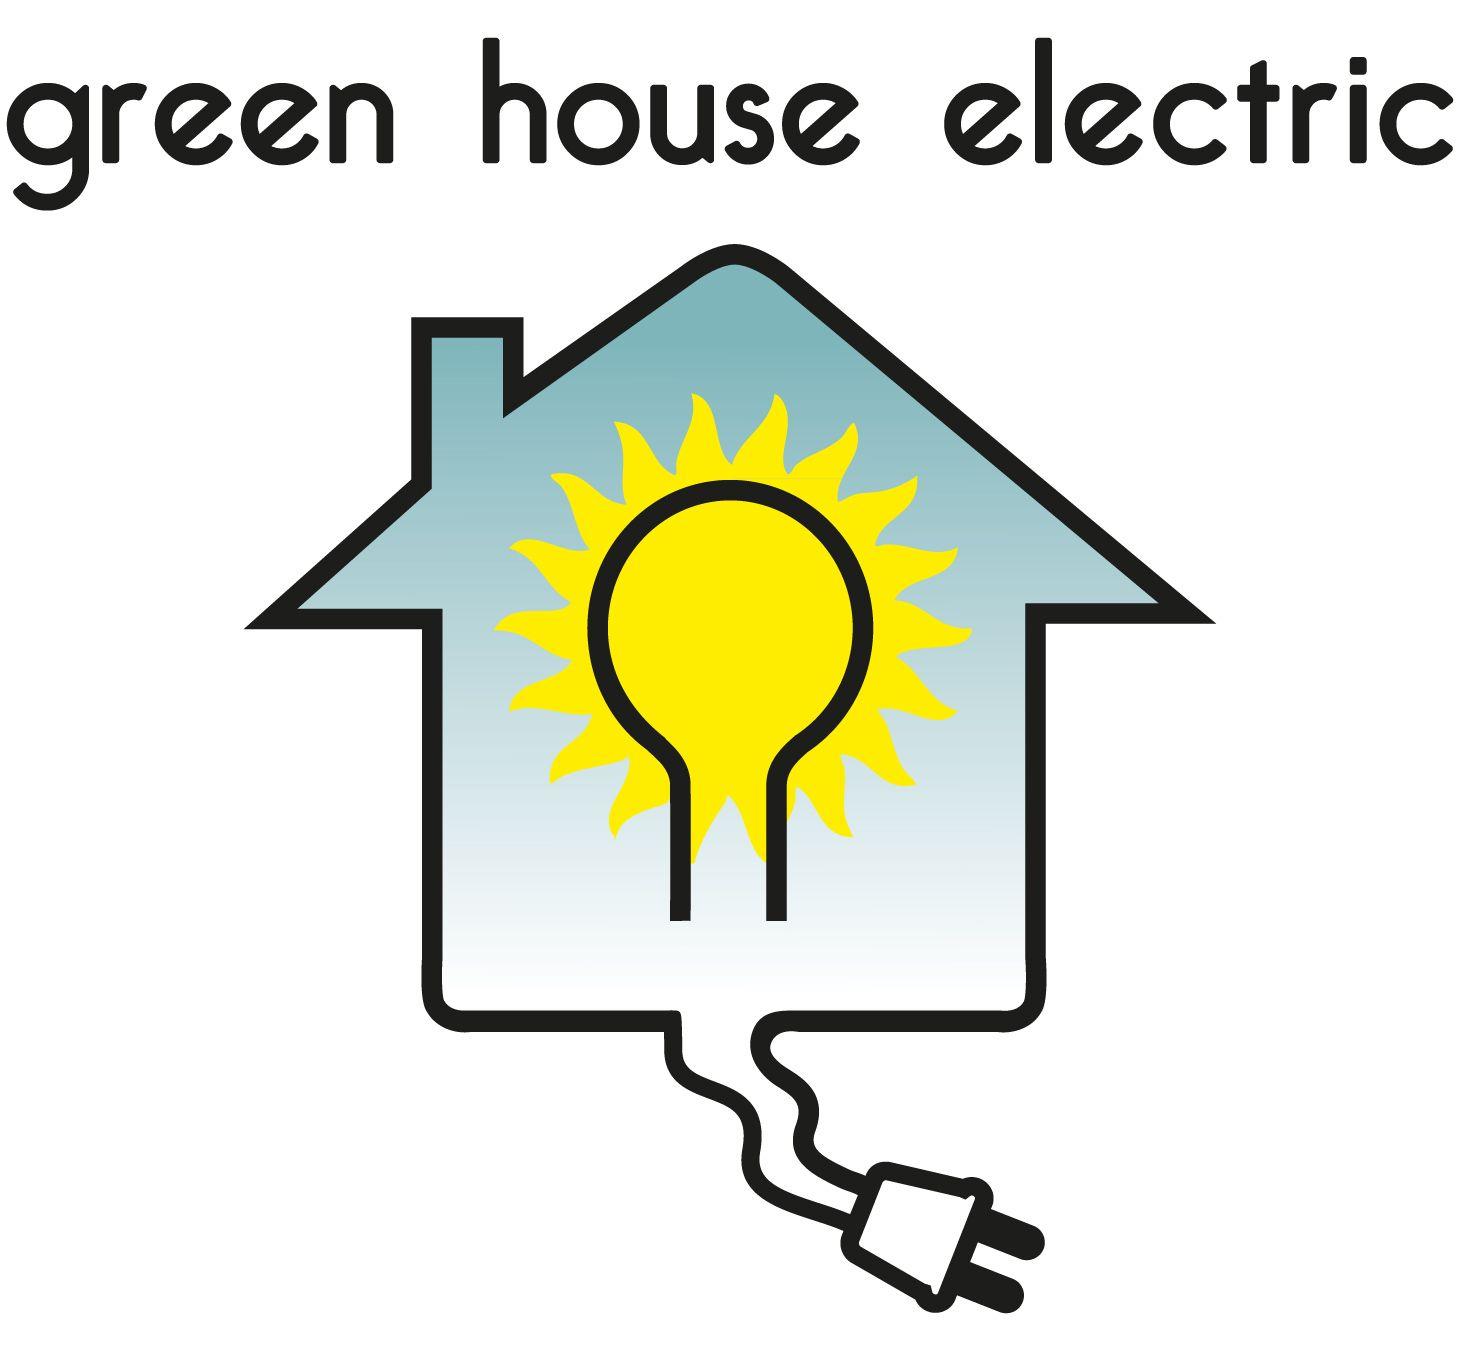 Electric House Logo - Green House Electric